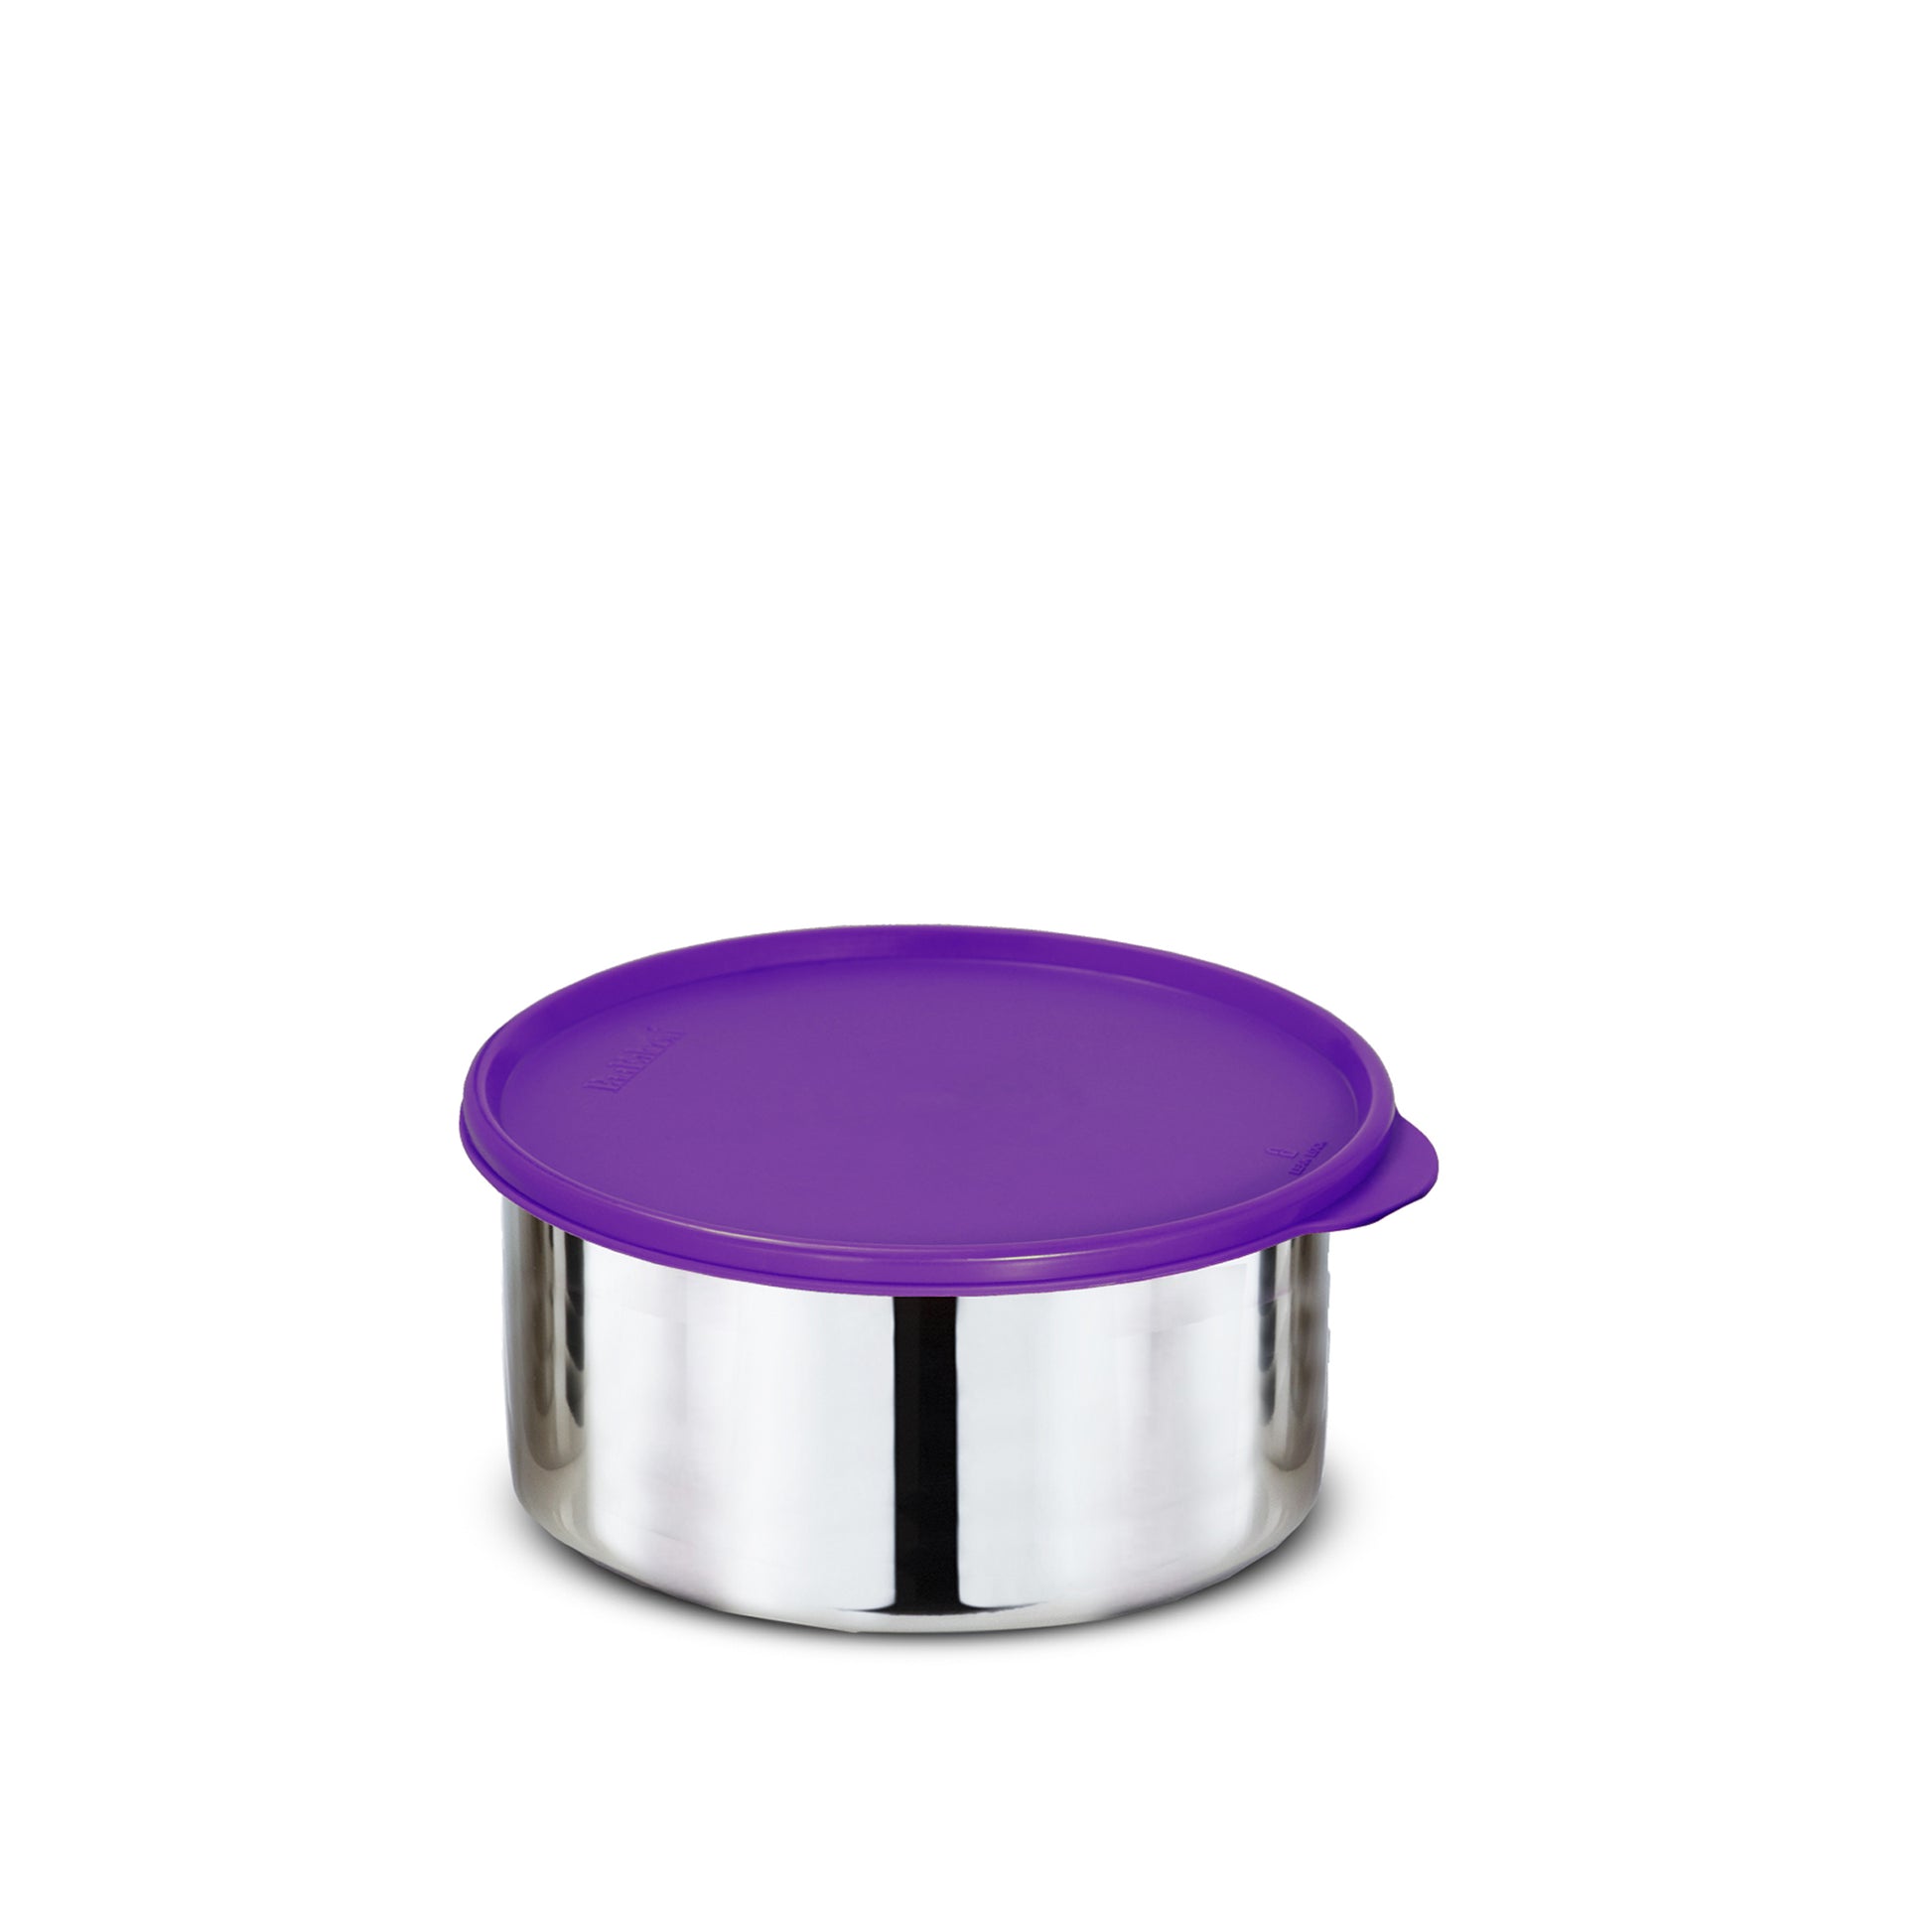 PddFalcon Stainless Steel Lunch Box Container 7.2 Purple 